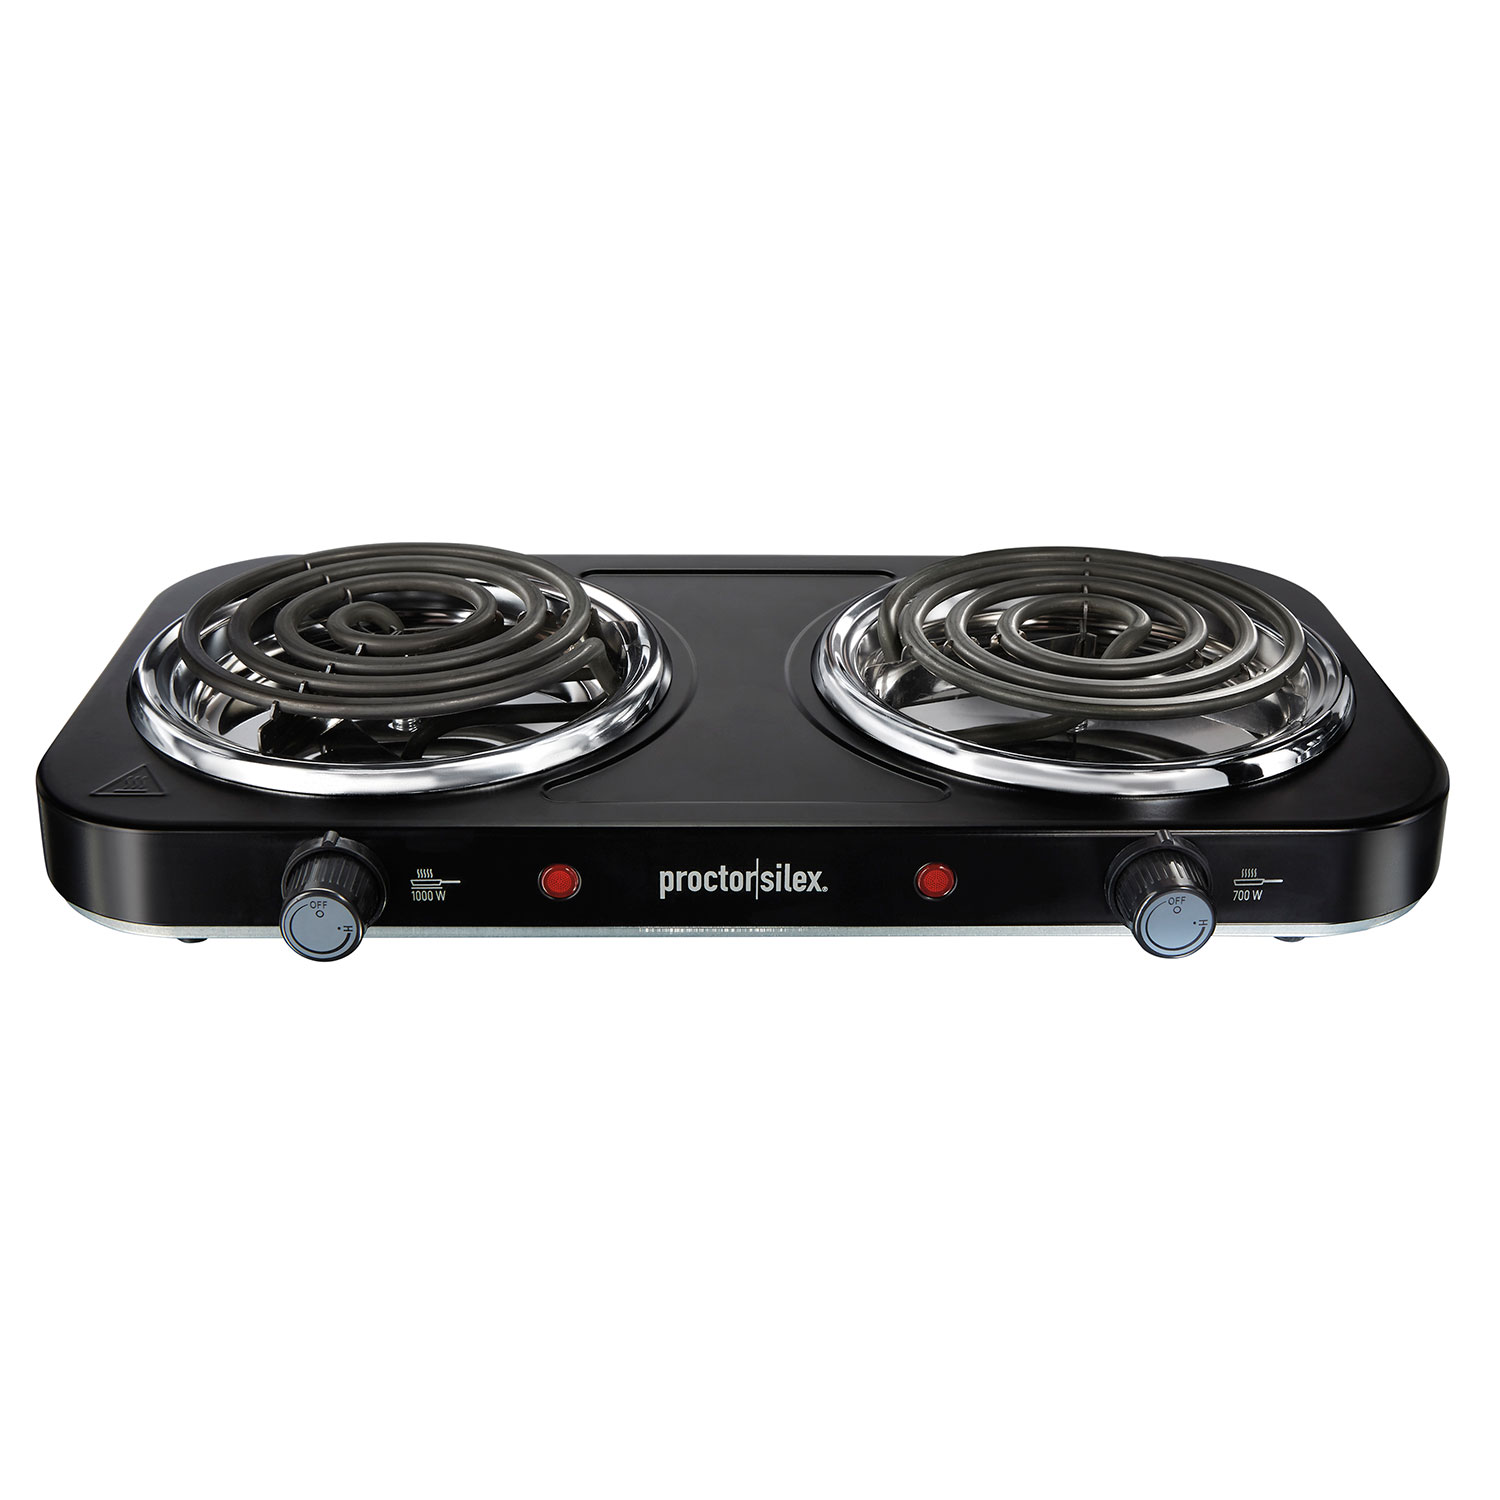 Proctor Silex Electric Stove, Single Burner Cooktop, Compact and Portable,  Adjustable Temperature Hot Plate, 1200 Watts, White & Stainless (34106)